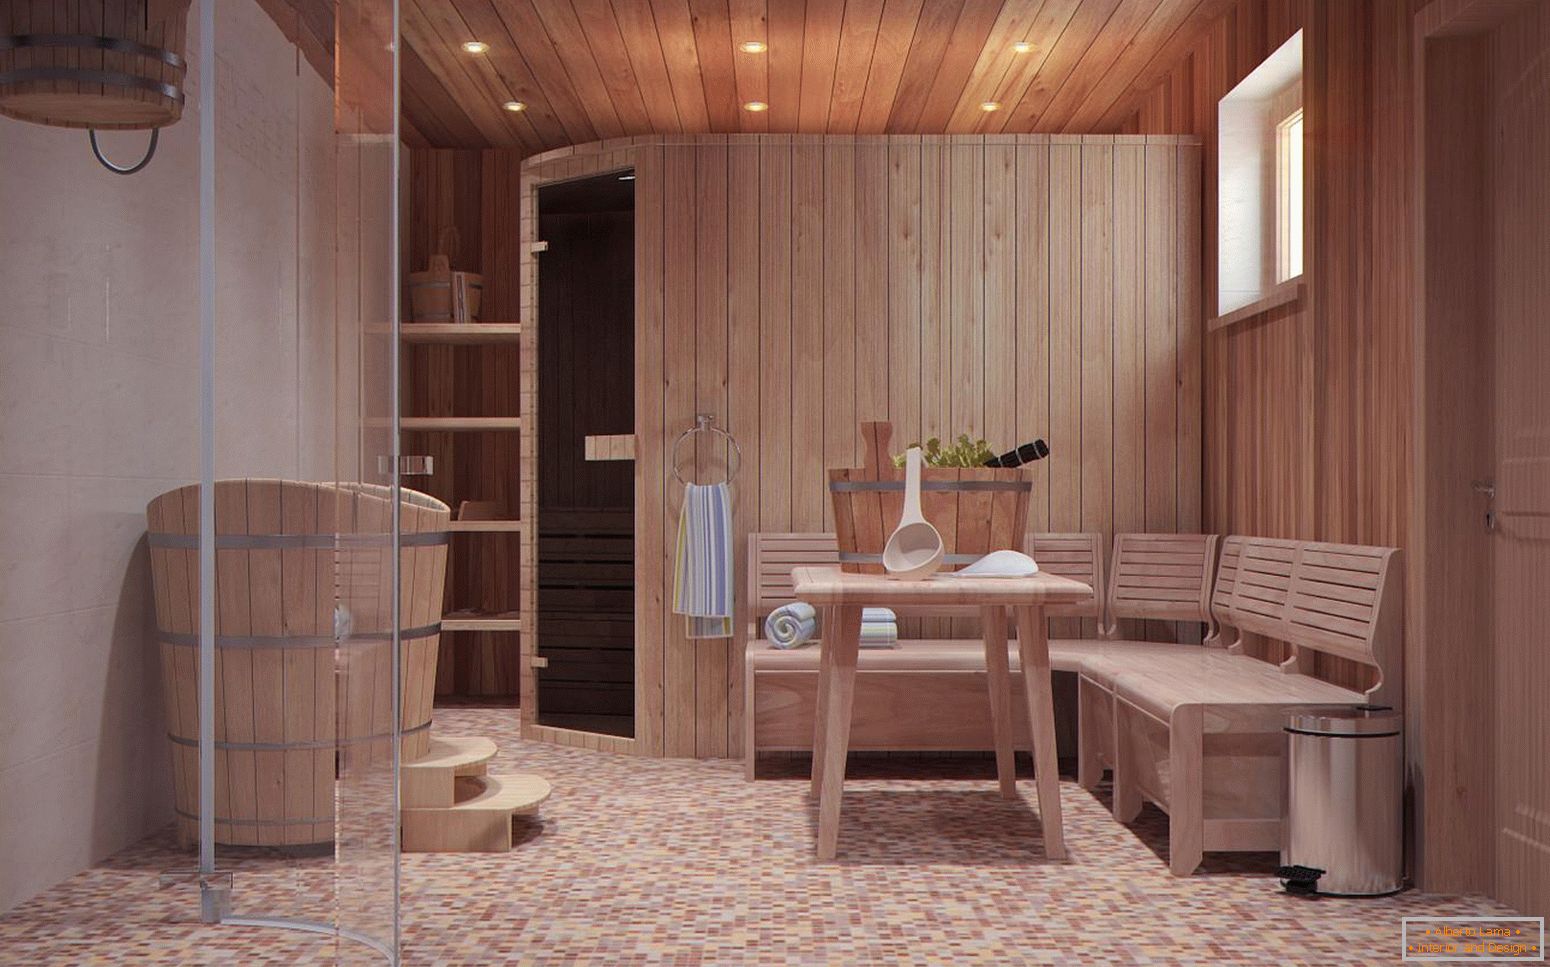 A relaxation room in a Scandinavian style bathhouse